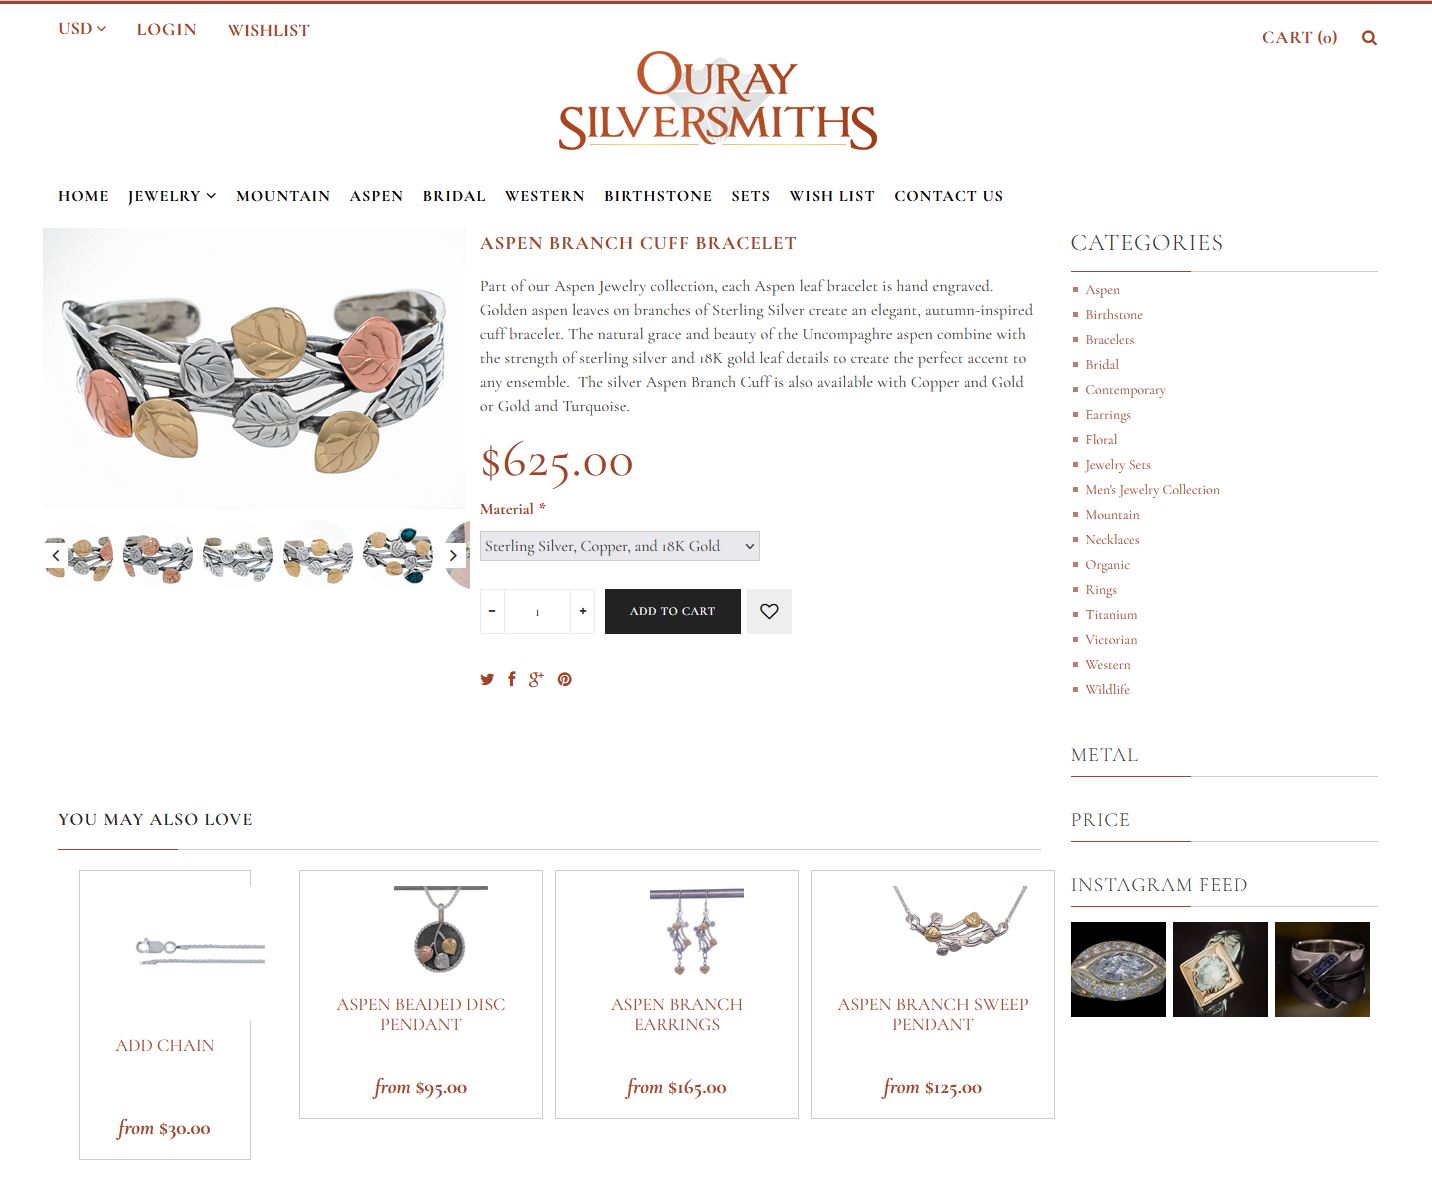 Ouray Silversmiths Product Page before the re-design